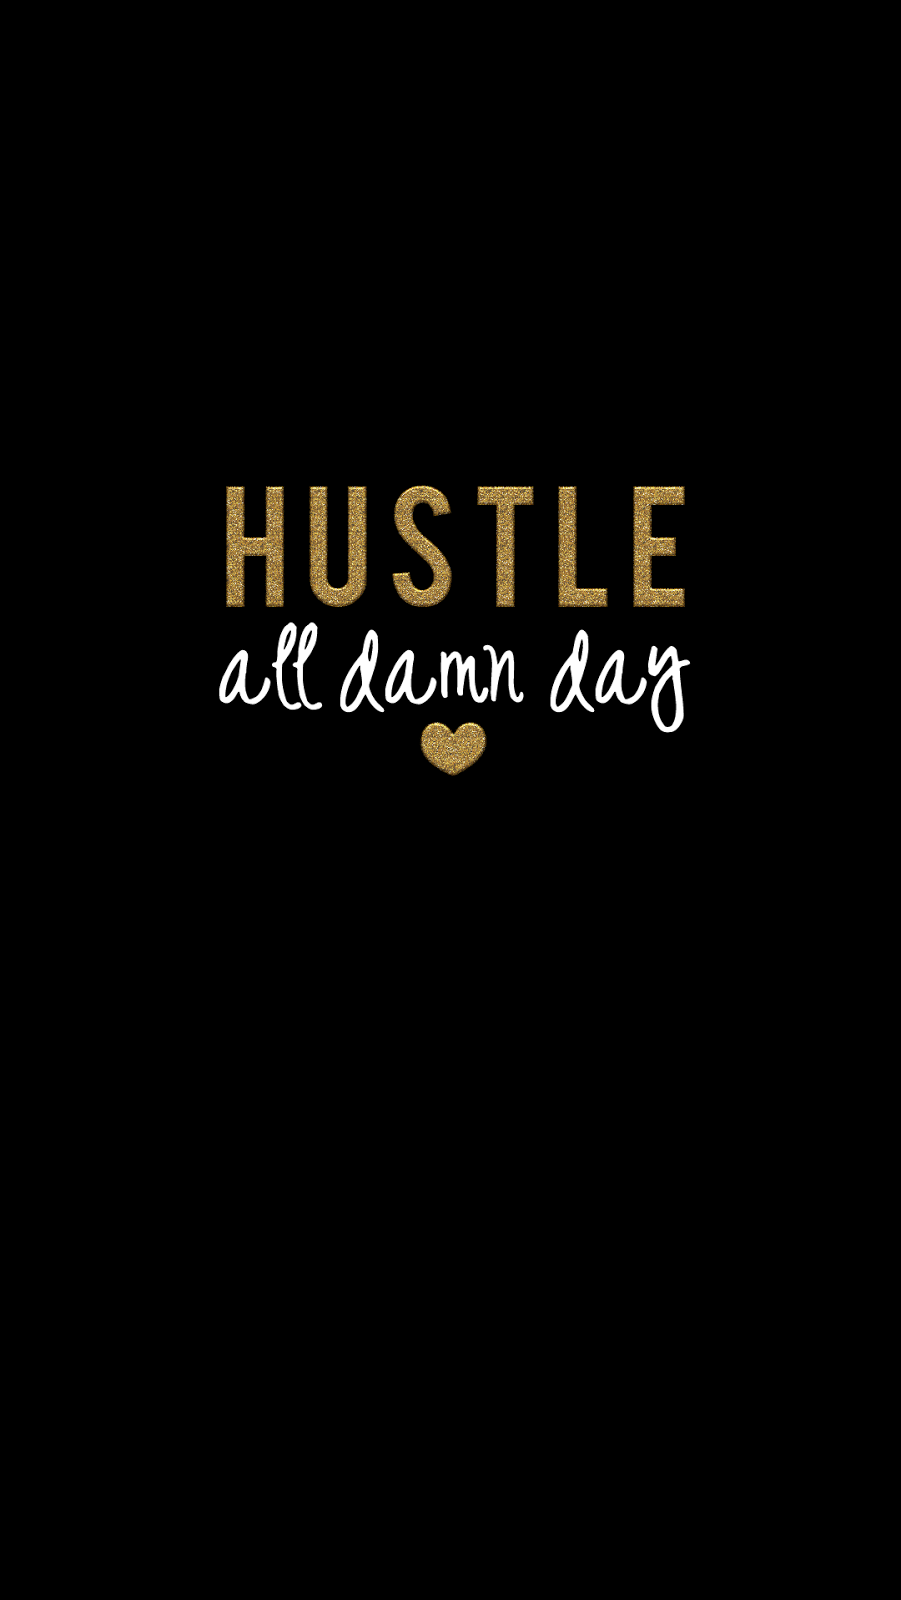 work_bitch1.png 901×600 pixels #risspected. Sassy wallpaper, Hustle quotes, Wallpaper quotes